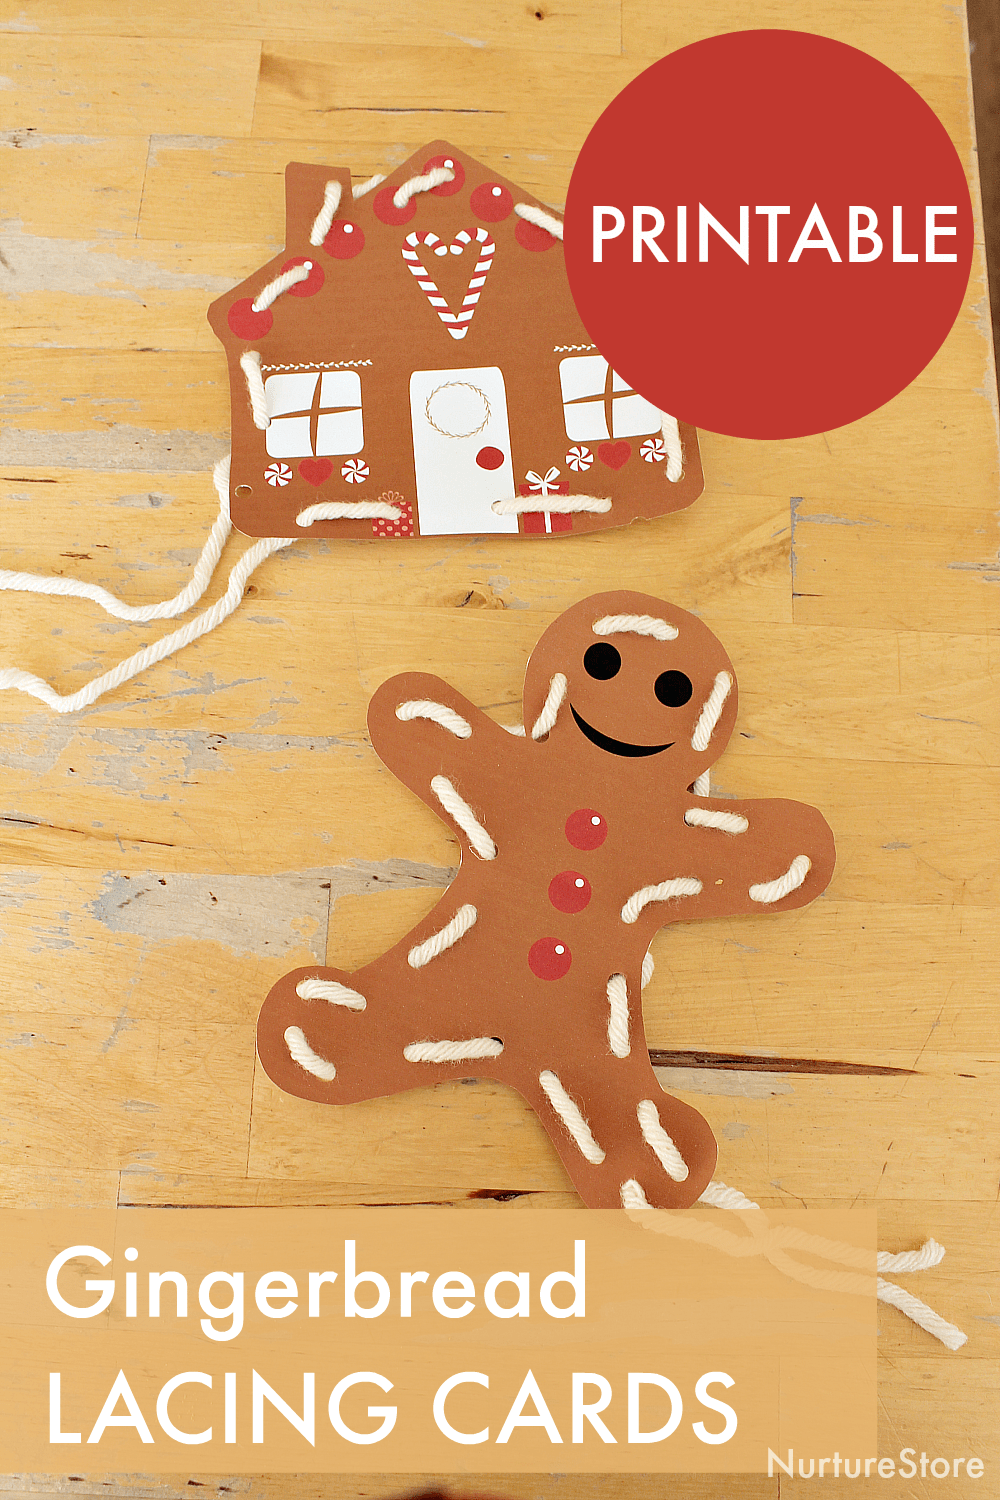 Gingerbread printable lacing cards for fine motor skills practice